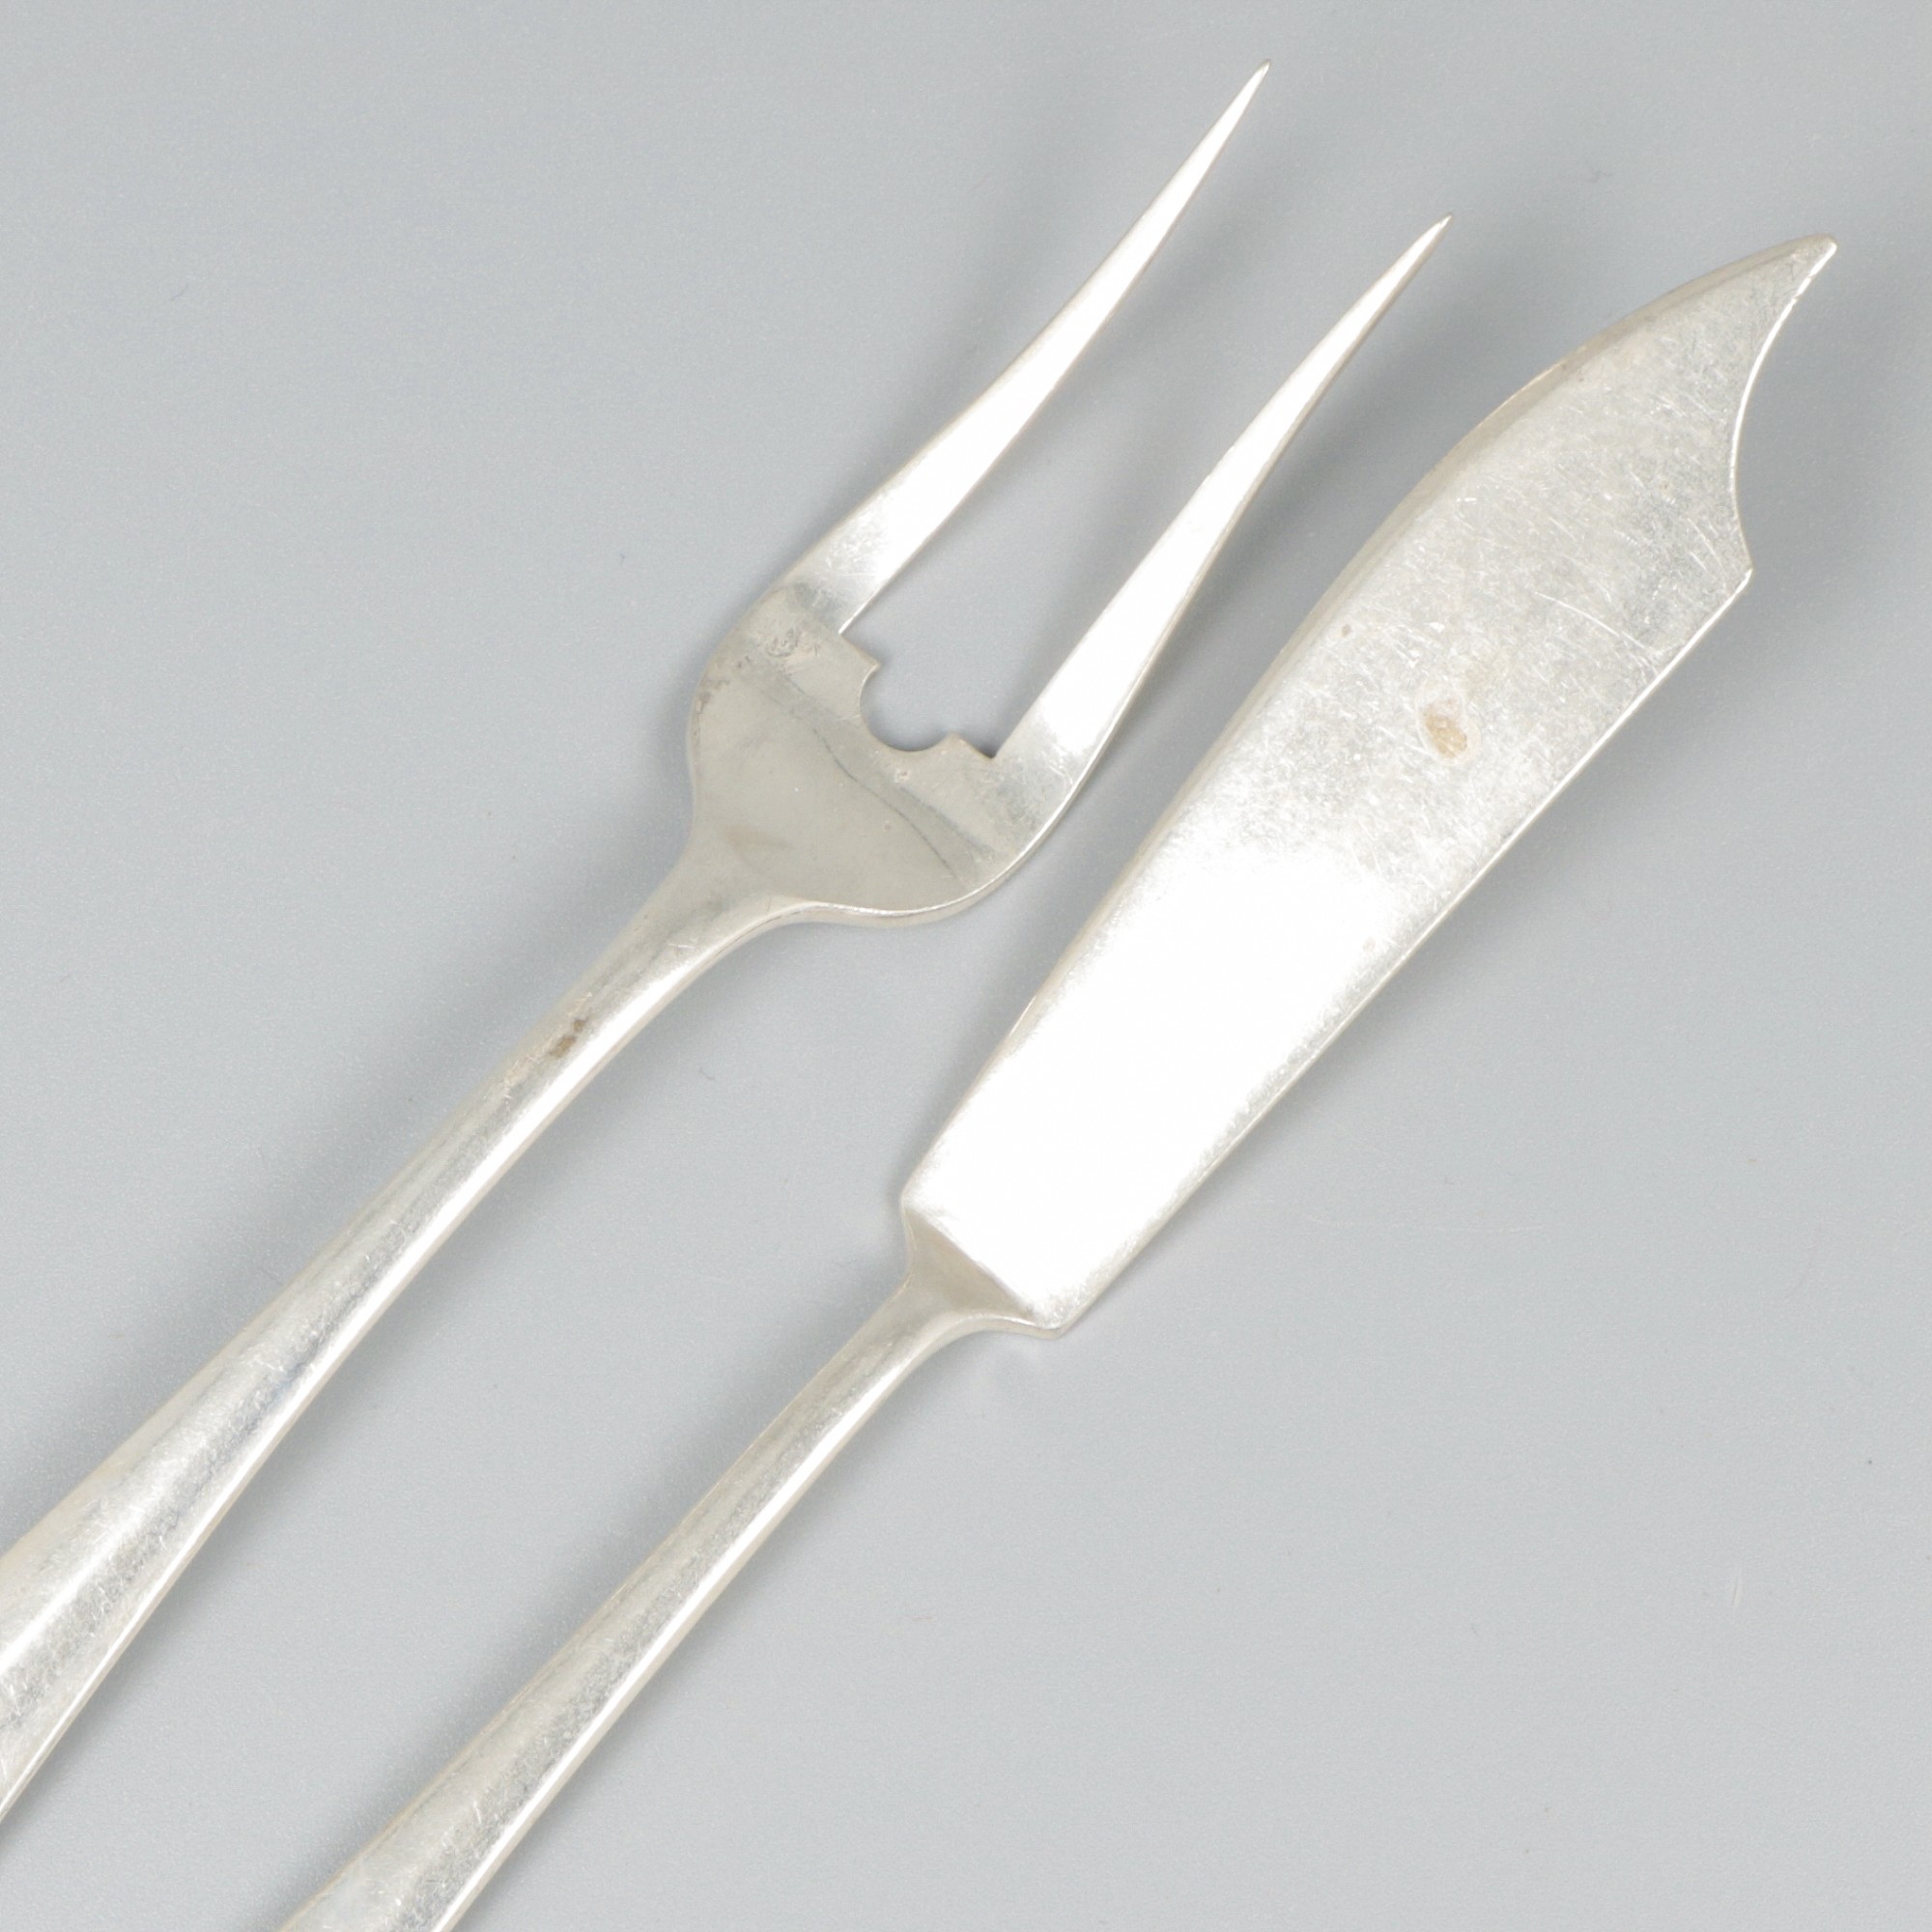 Butter knife & meat fork "Haags Lofje" silver. - Image 3 of 6